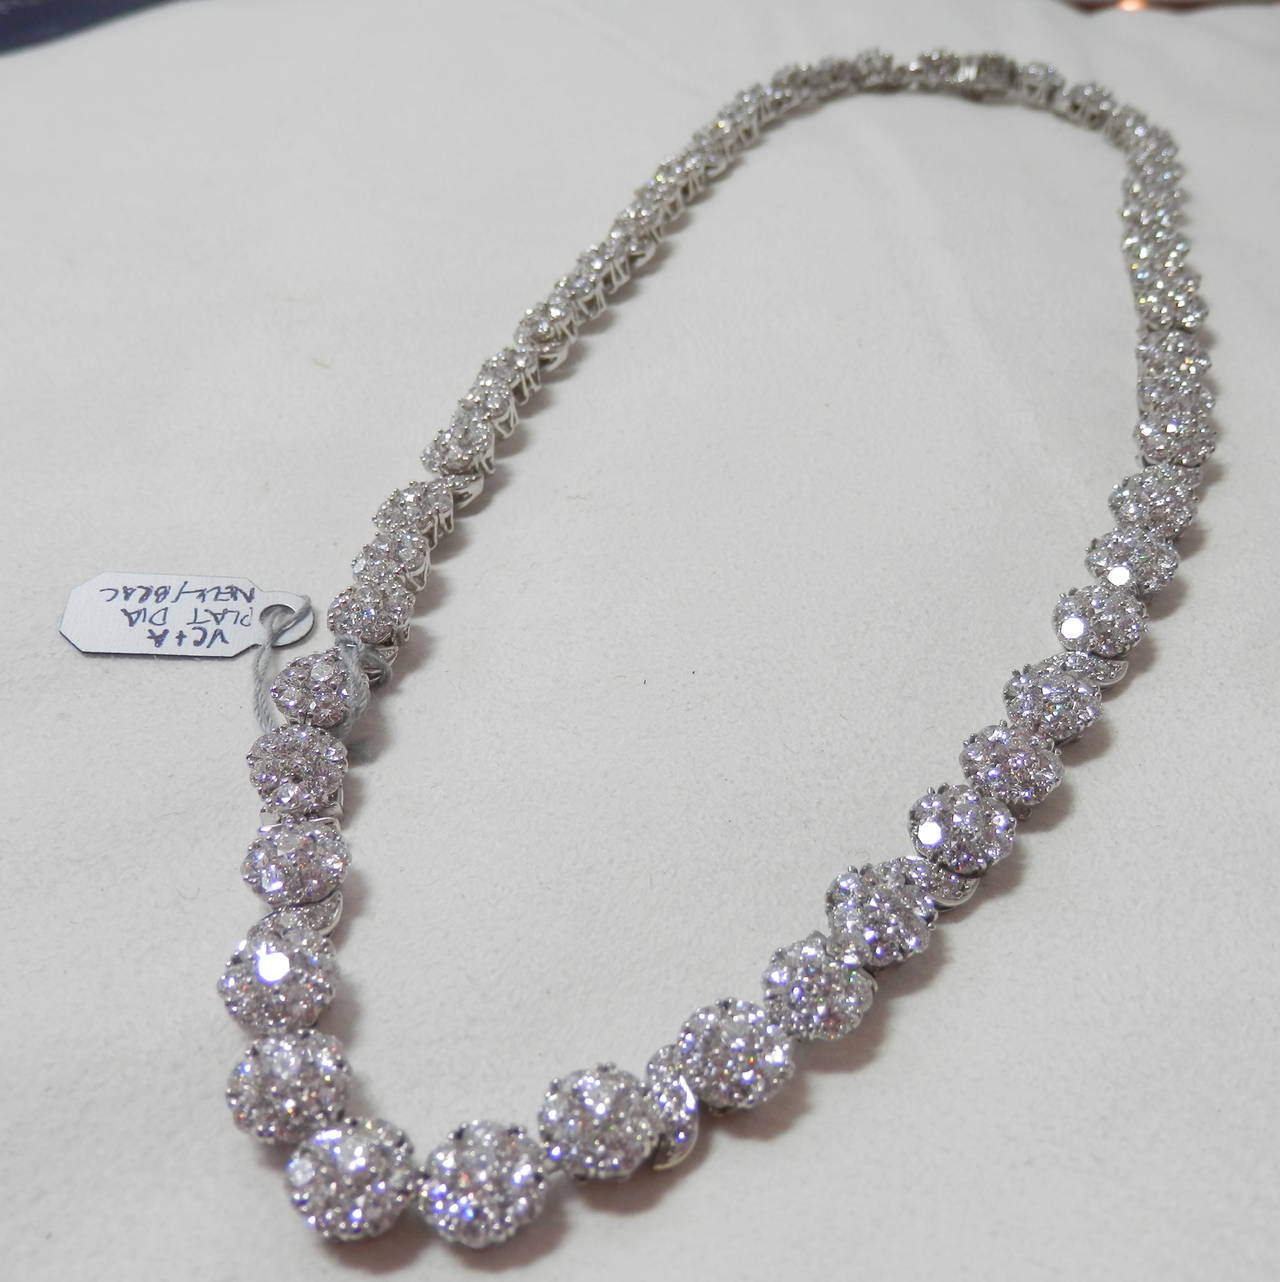 18K white gold this is a cluster necklace with 398 fine white diamonds (F/VVS)  There are approx. 38 cts.  It is signed Van Cleef & Arpels and also numbered NY62307  It is wearable in the length shown or shortened it can be a choker or a pair of